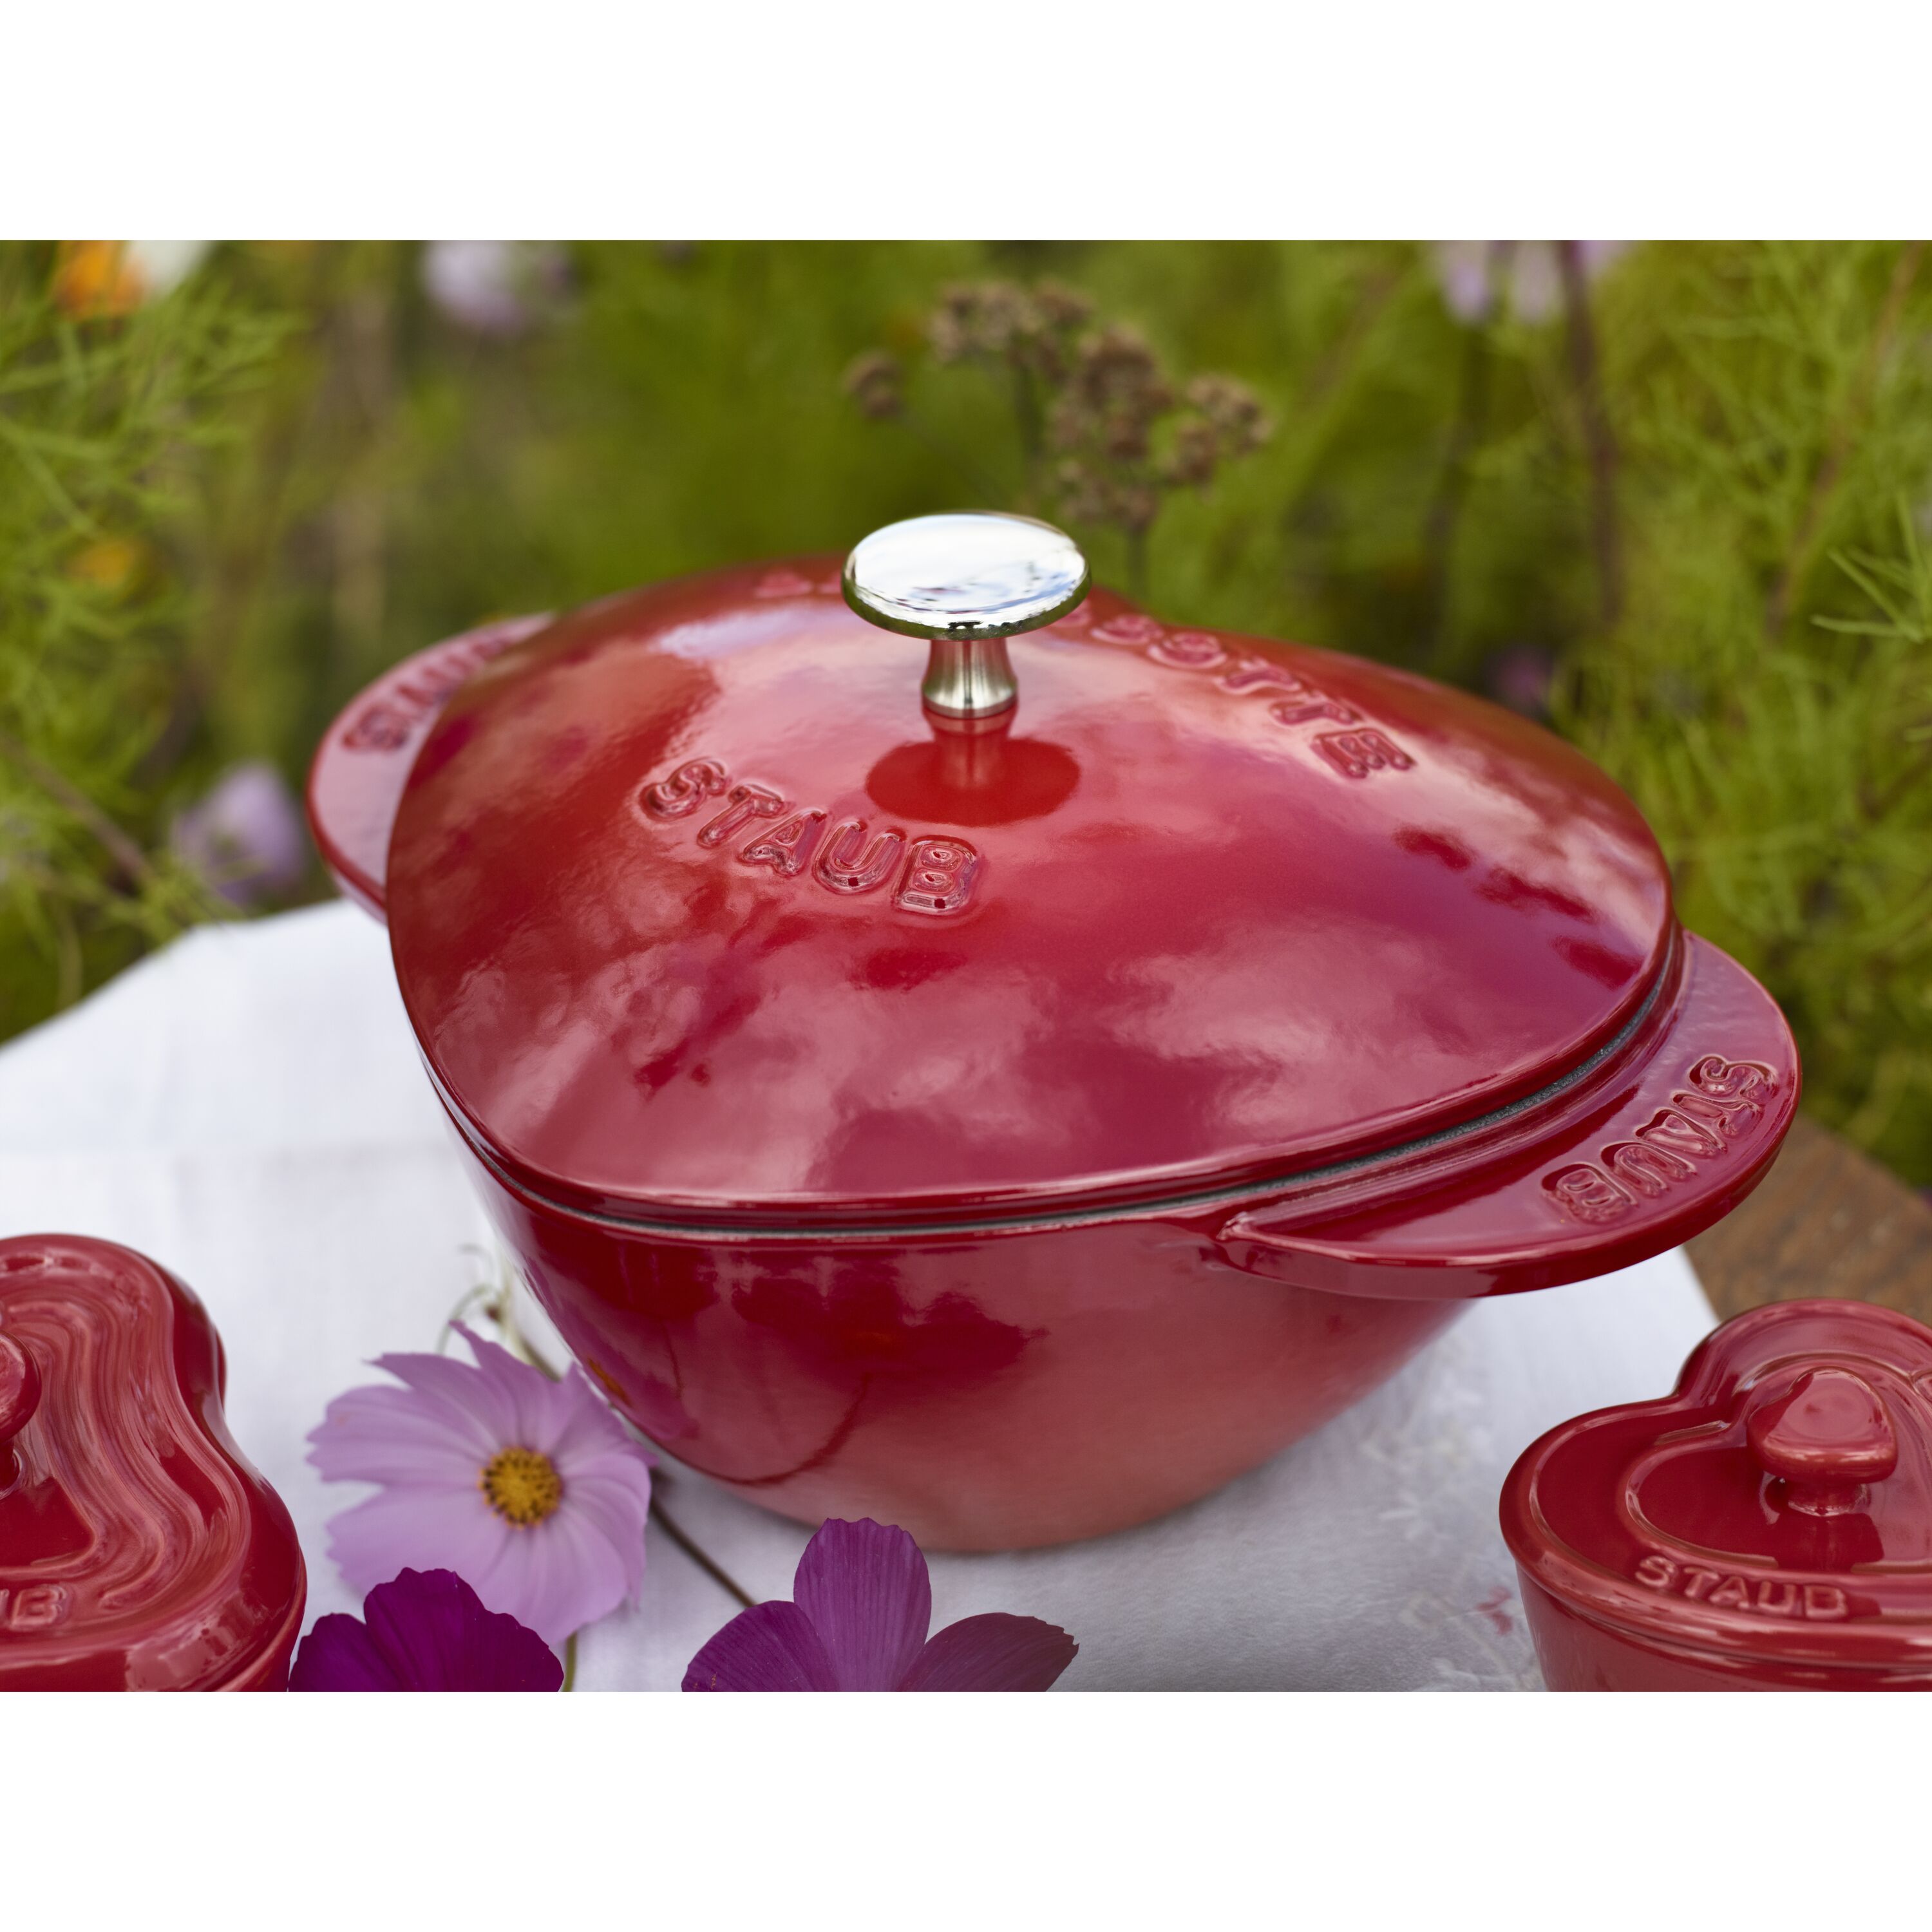 12CM Heart Shaped Red Dutch Oven Small Enameled Cast Iron Pot With